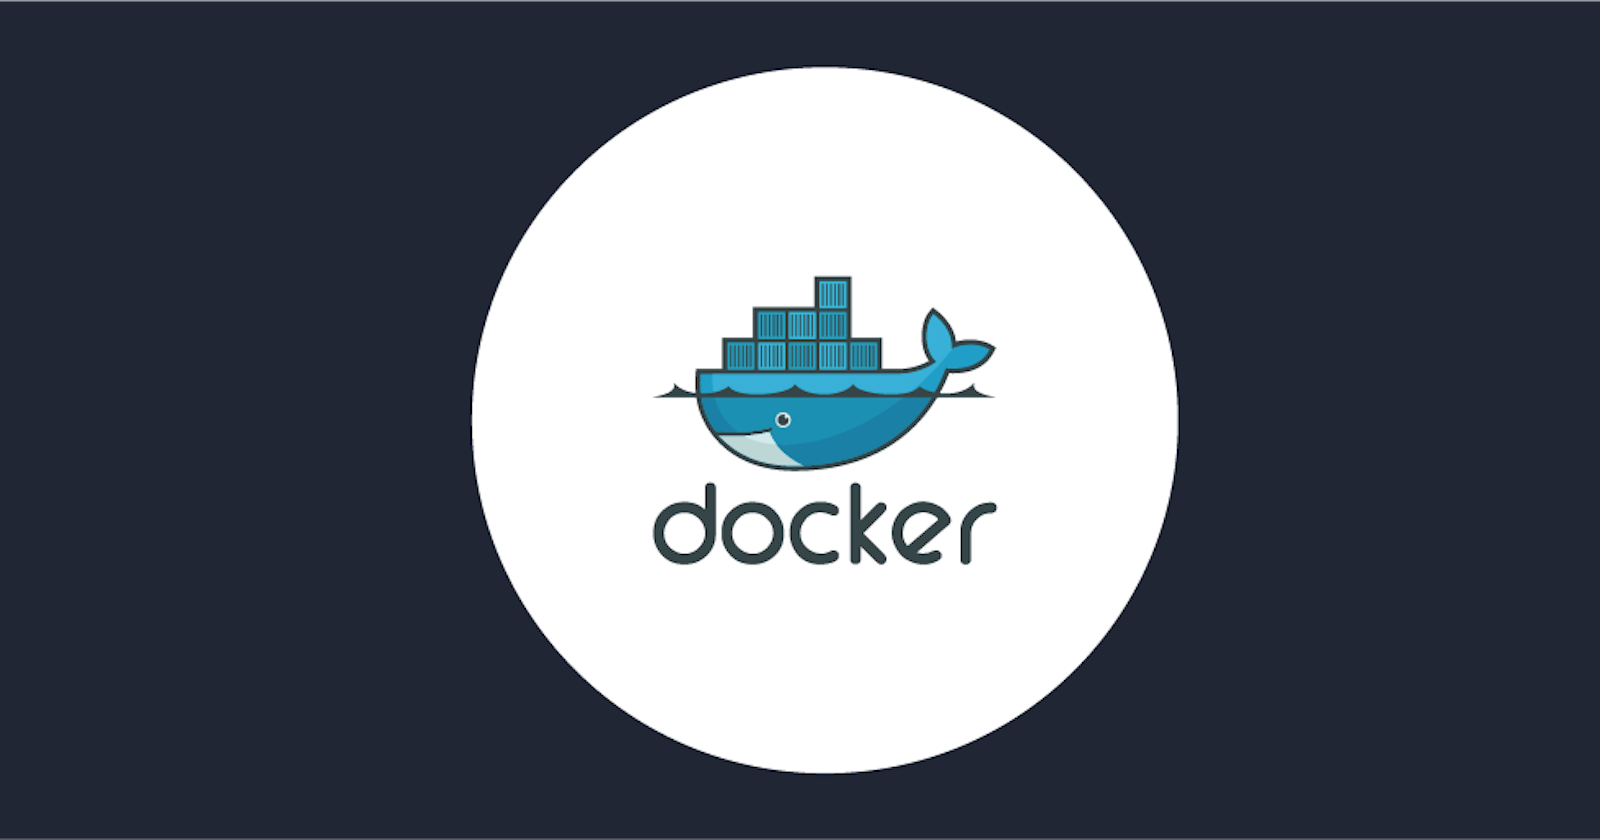 Deep Dive with Docker along with Project